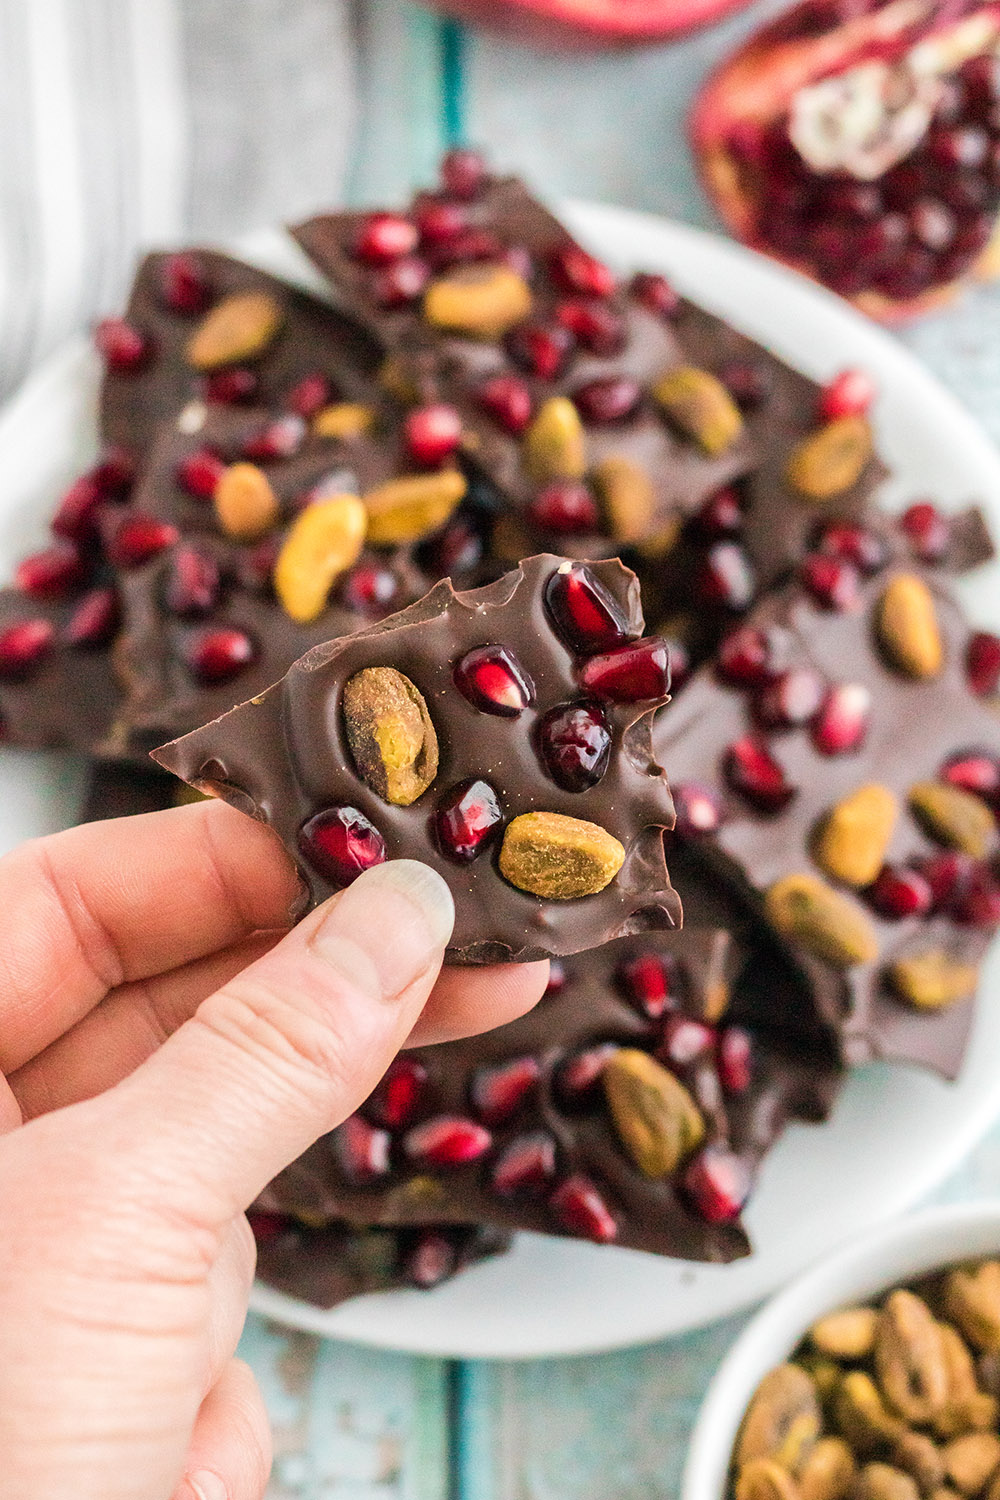 Holding a piece of chocolate pomegranate with pistachios candy over the plate full of the pieces. 